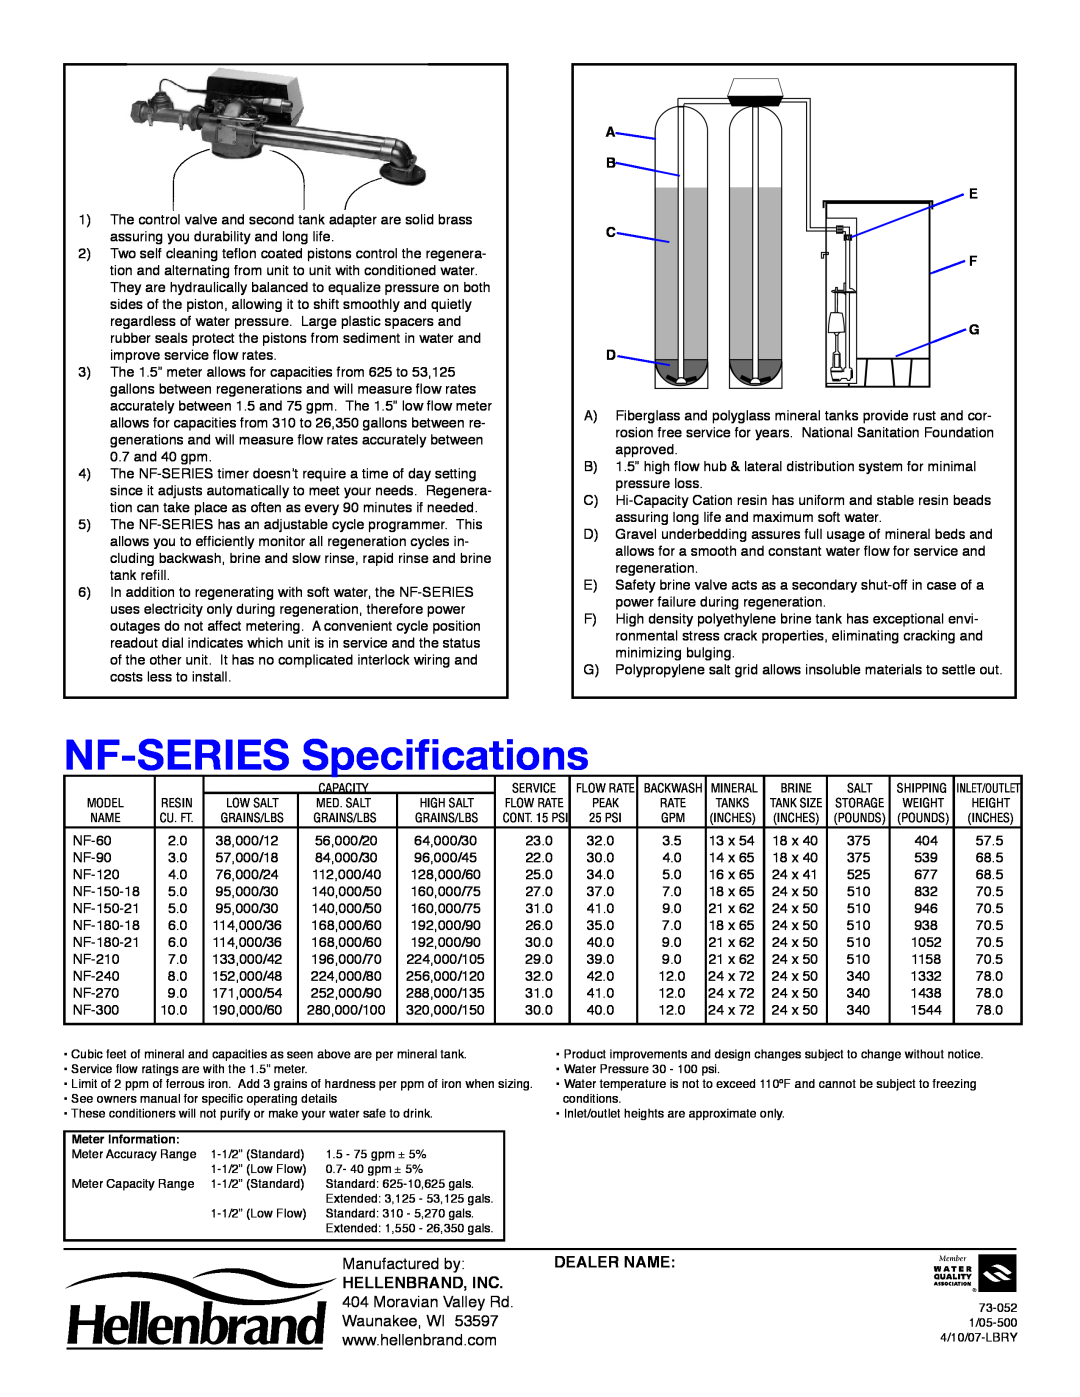 Argosy Research NF 1.5" Series manual NF-SERIES Specifications, Dealer Name, Hellenbrand, Inc, A B E C F G D 